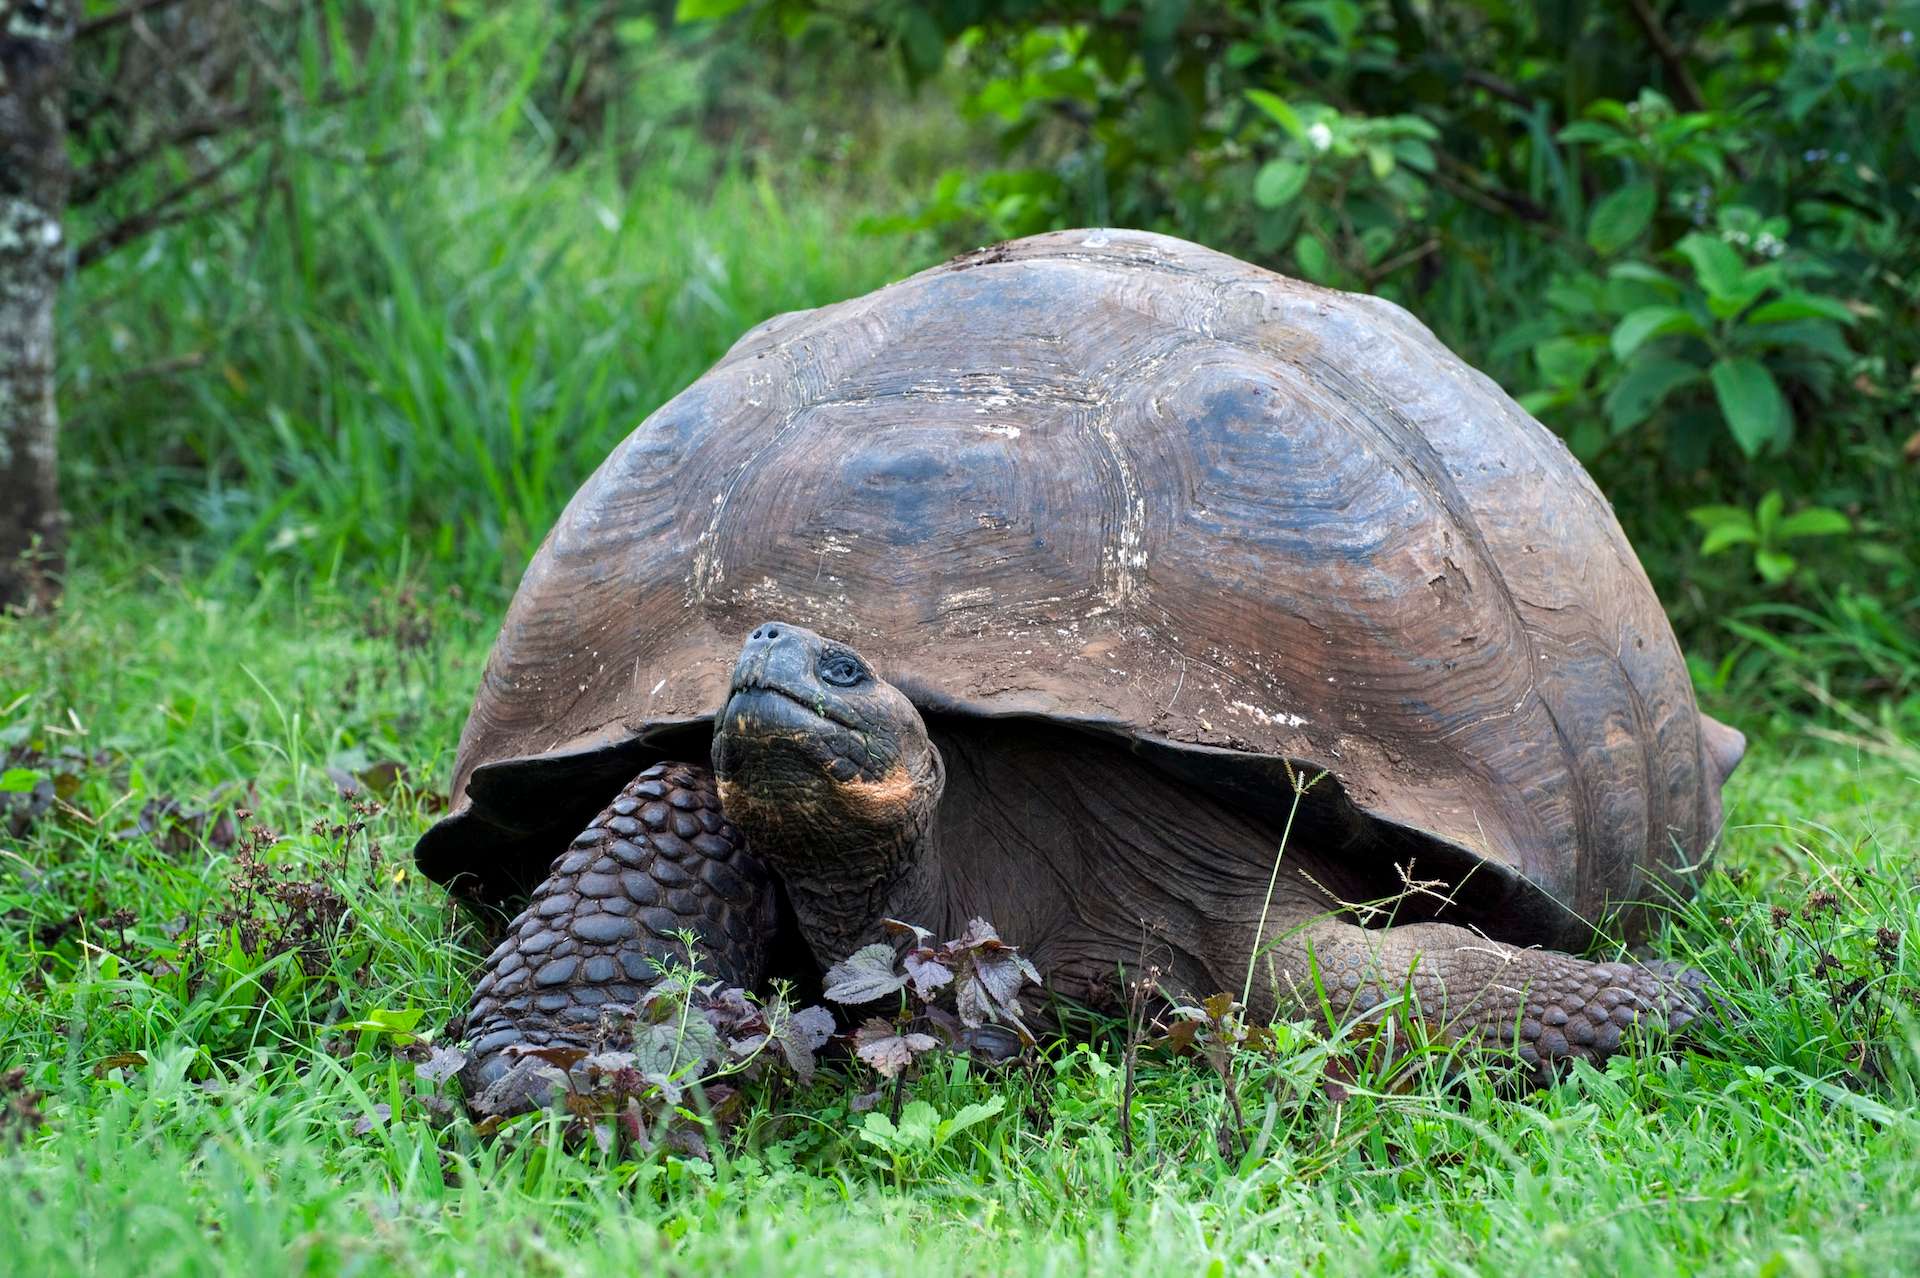 A Galapagos tortoise walking in the grass. 